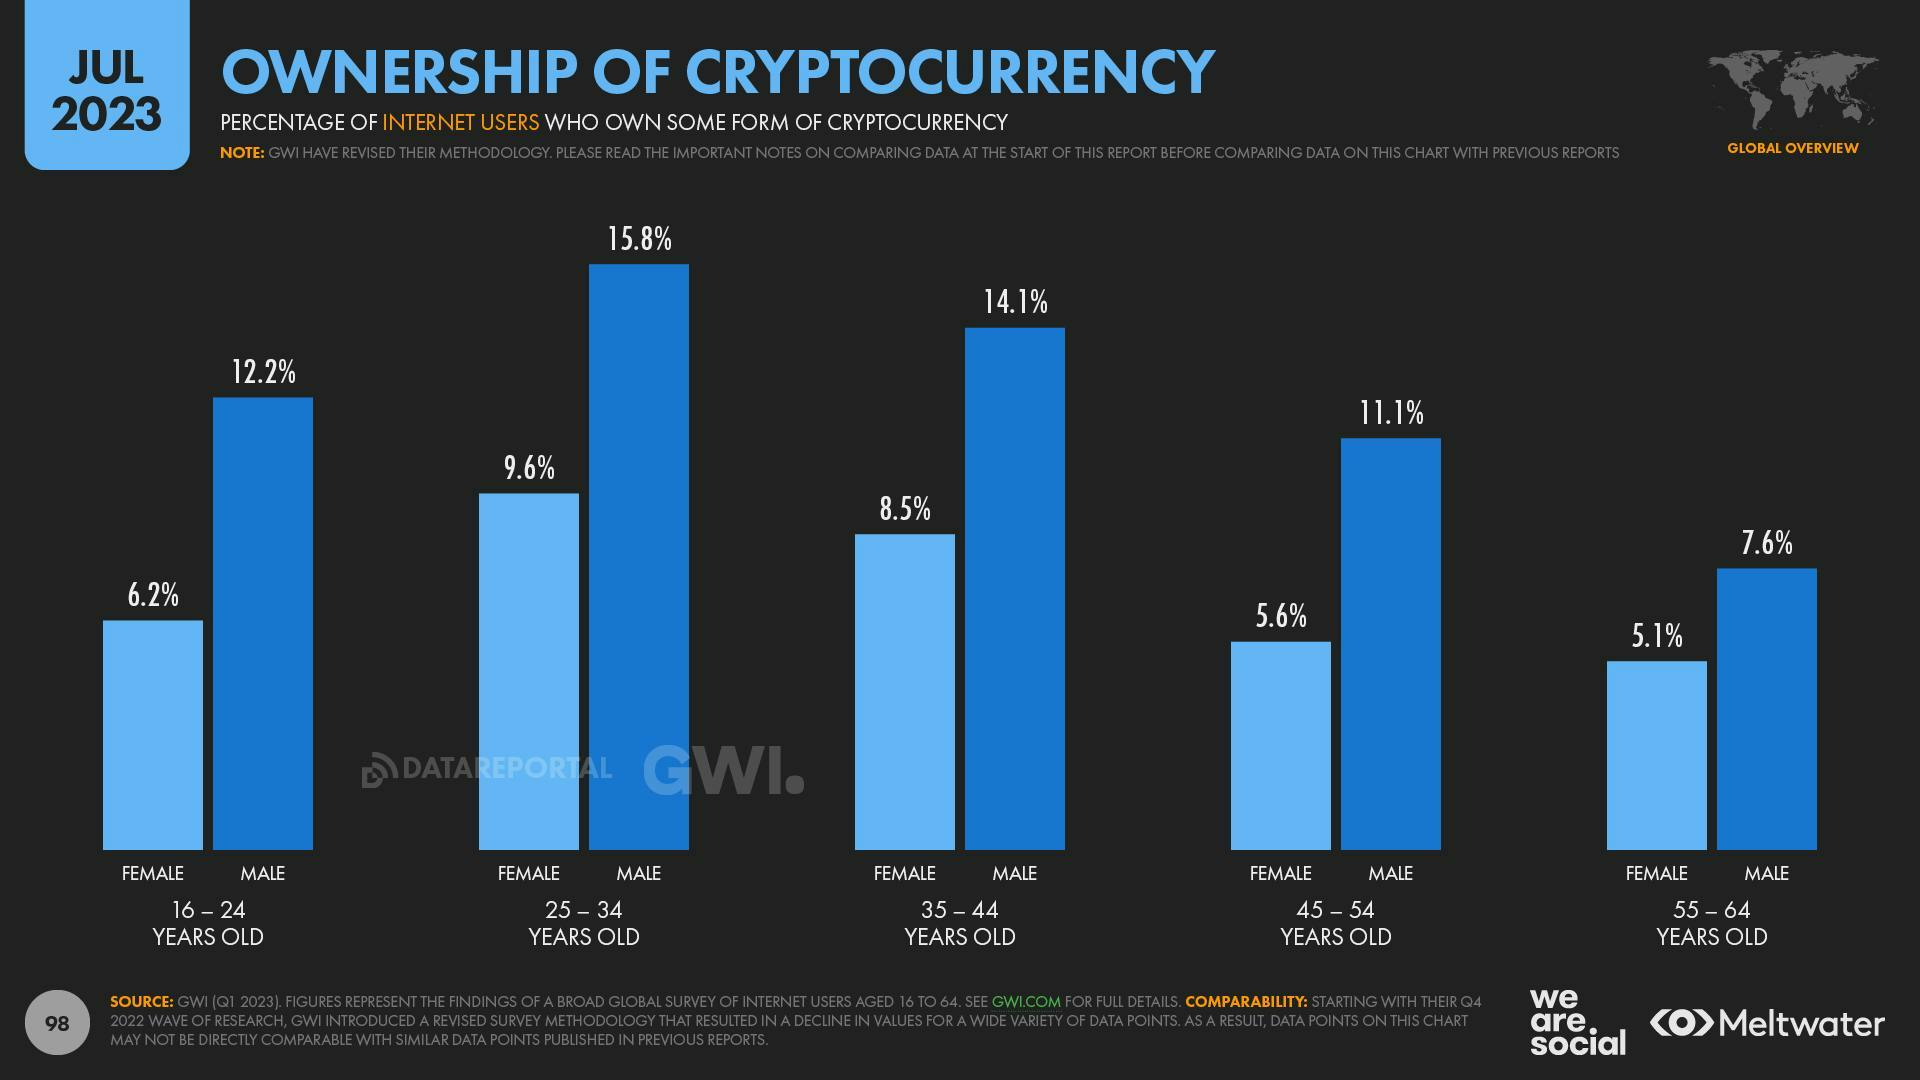 Ownership of cryptocurrency by gender and age group